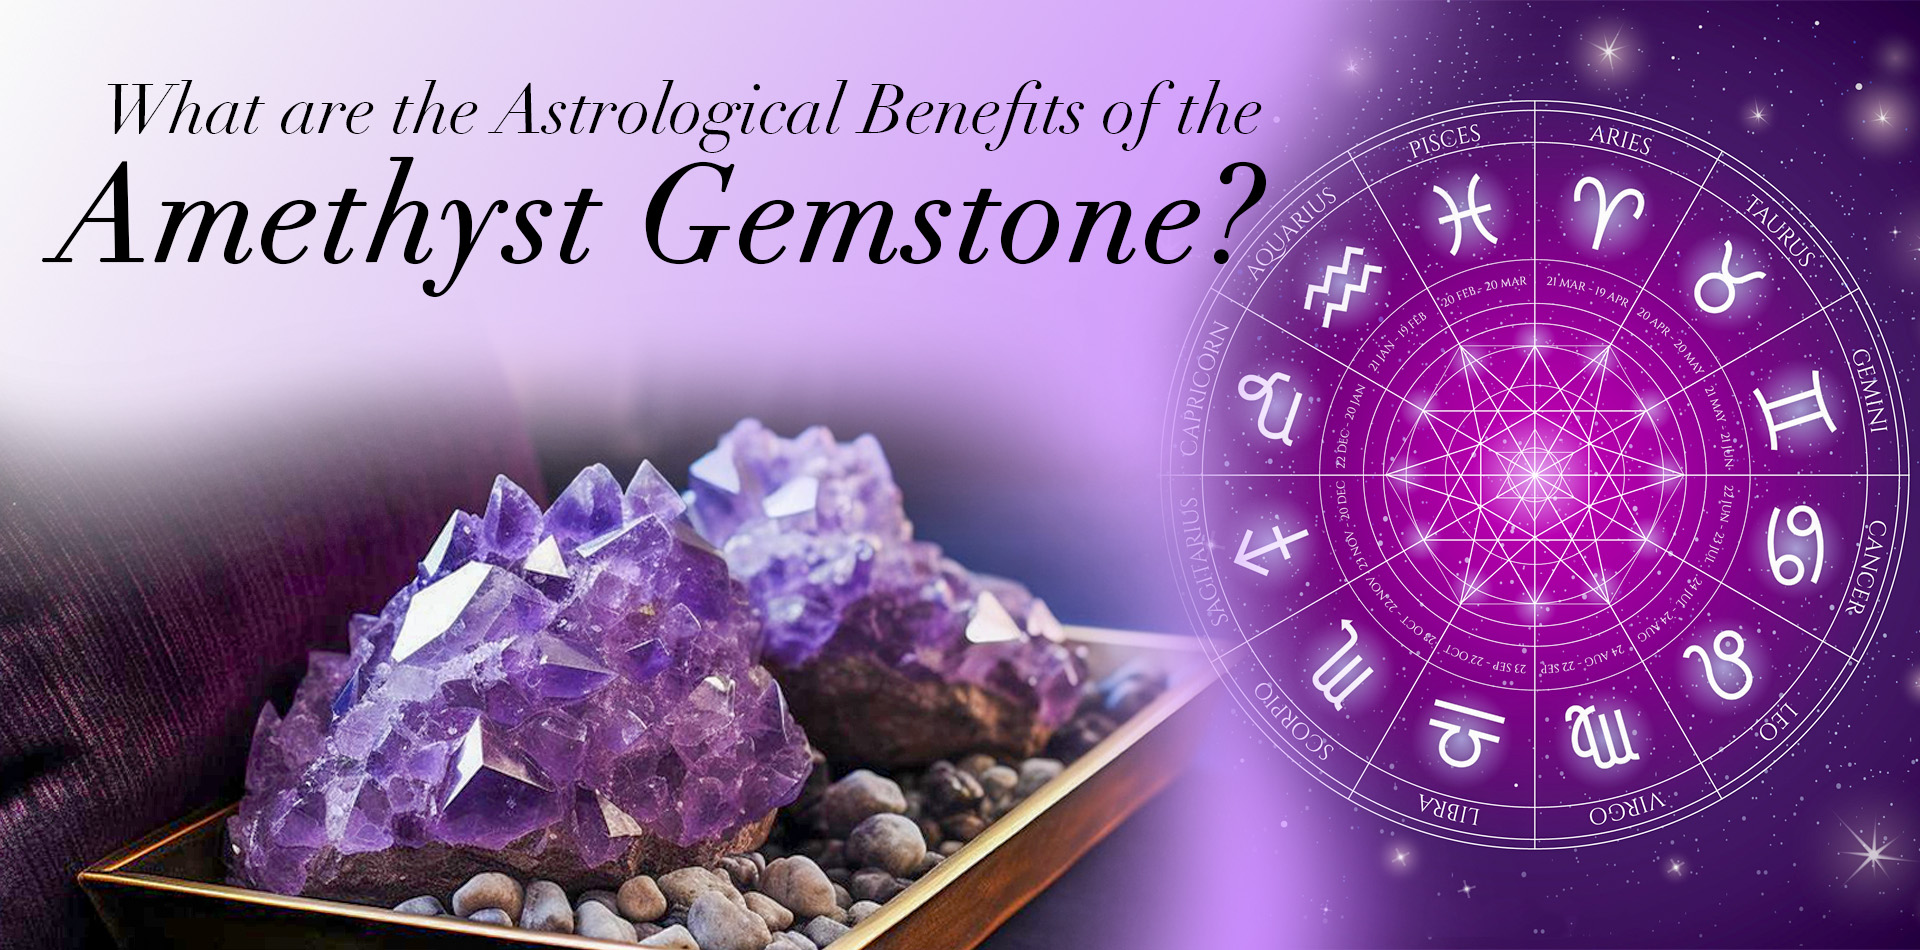 What Are The Astrological Benefits Of Amethyst Gemstones? 